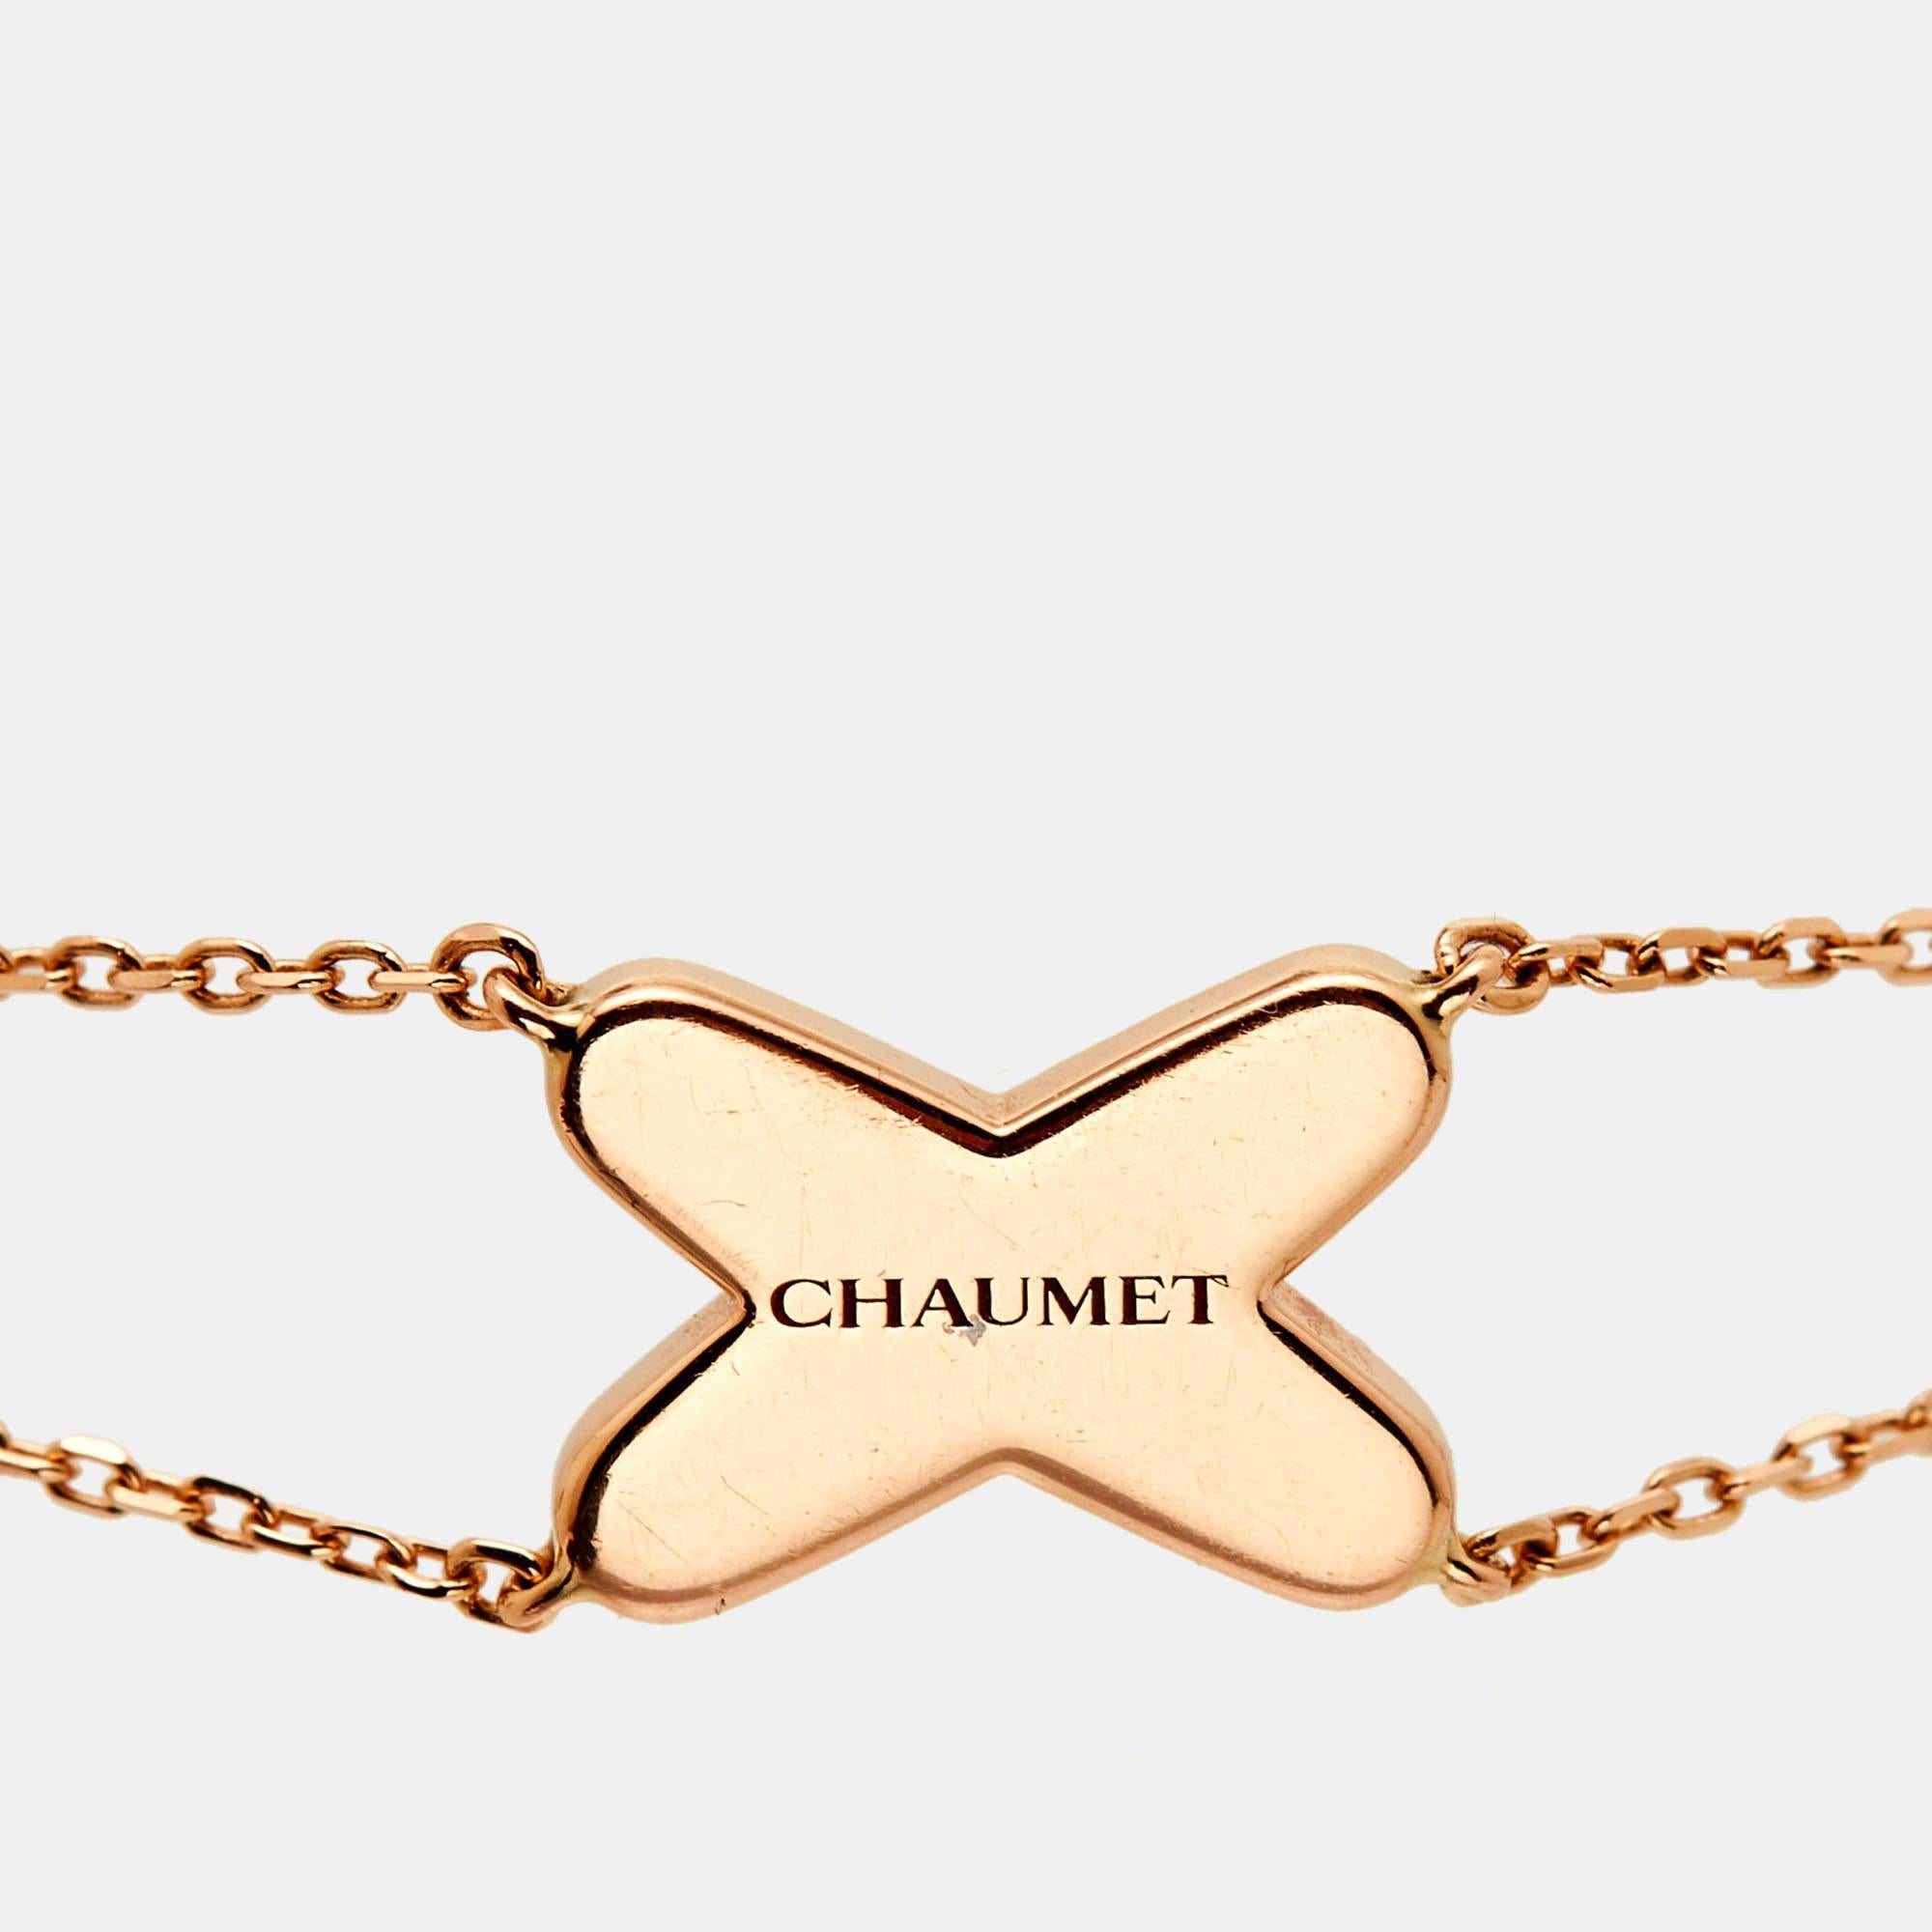 This incredibly-made bracelet from Chaumet has been created by the brand's skilled craftsmen with such precision that every line and curve is smoothened to perfection. The bracelet is sculpted using 18k rose gold and designed with double chains and